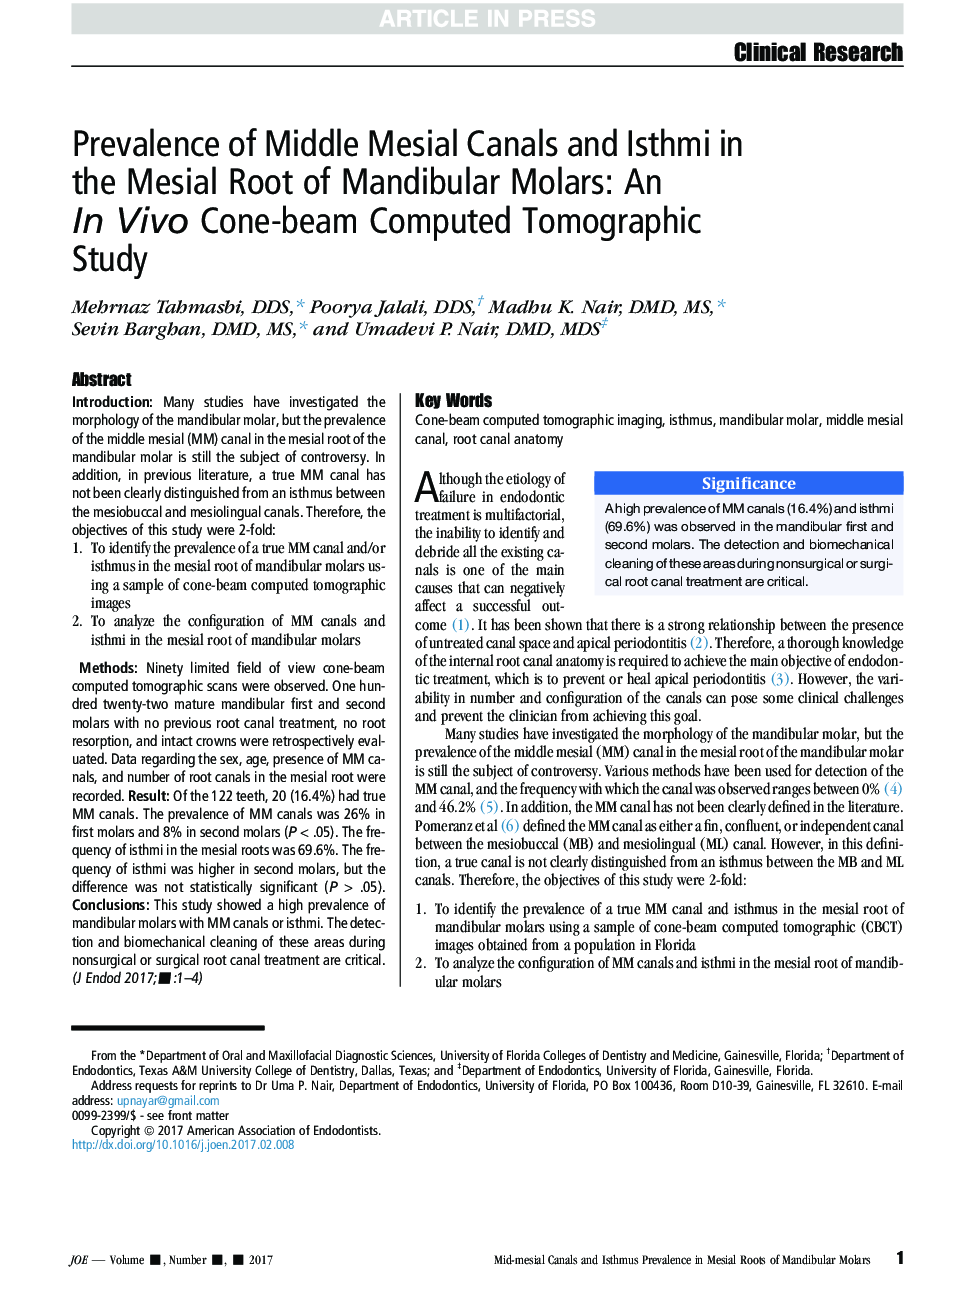 Prevalence of Middle Mesial Canals and Isthmi in the Mesial Root of Mandibular Molars: An InÂ Vivo Cone-beam Computed Tomographic Study